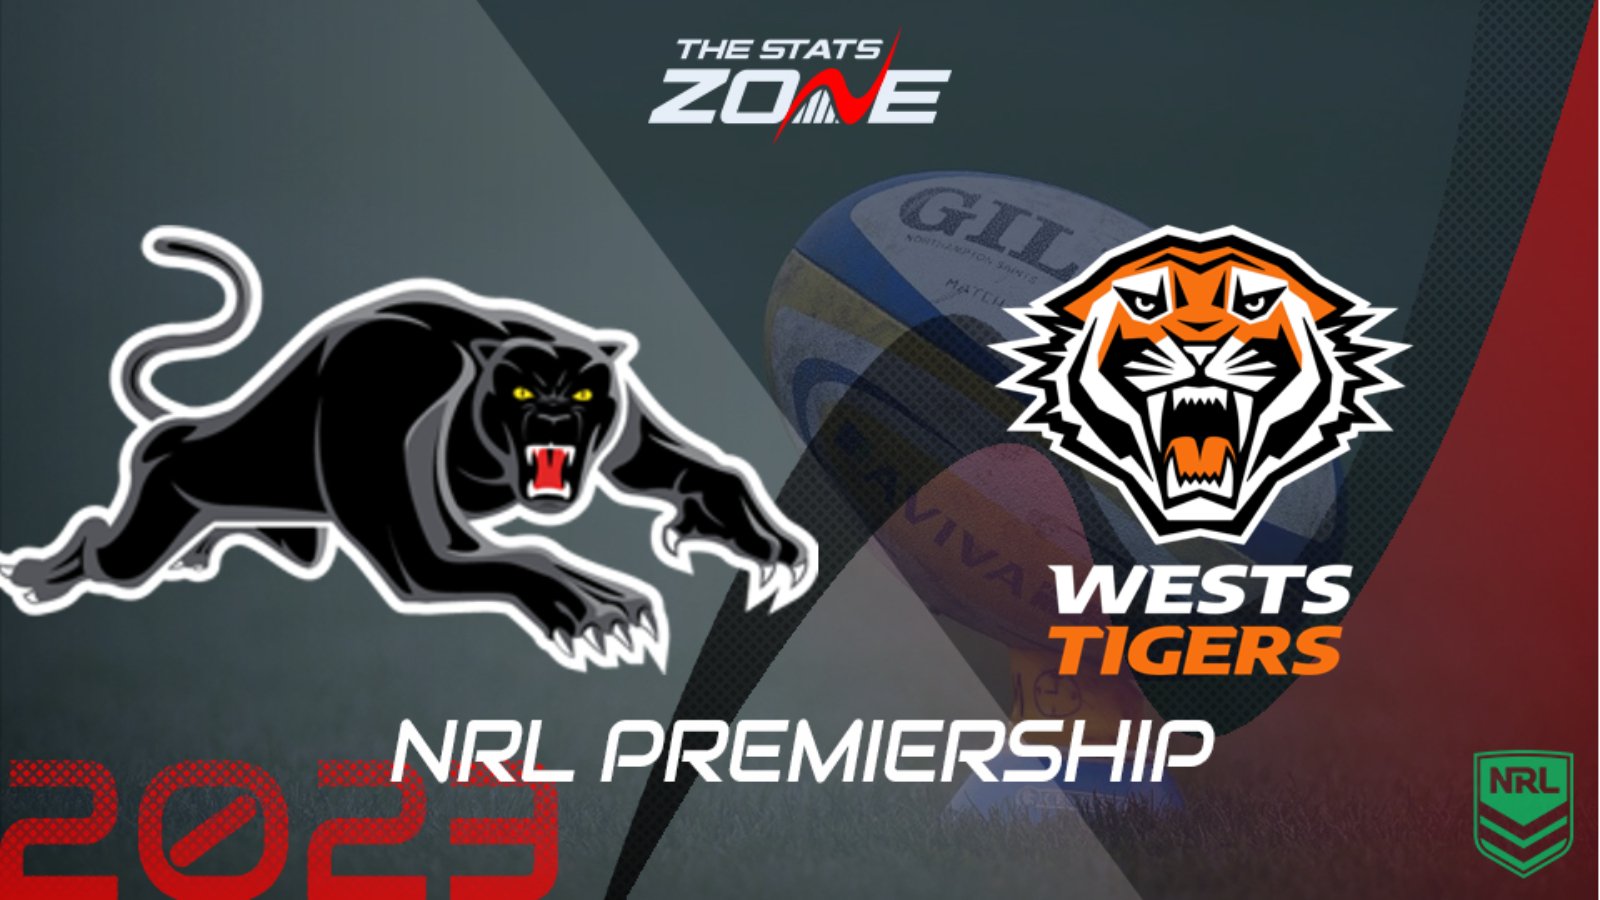 Penrith Panthers vs Wests Tigers Regular Season Preview